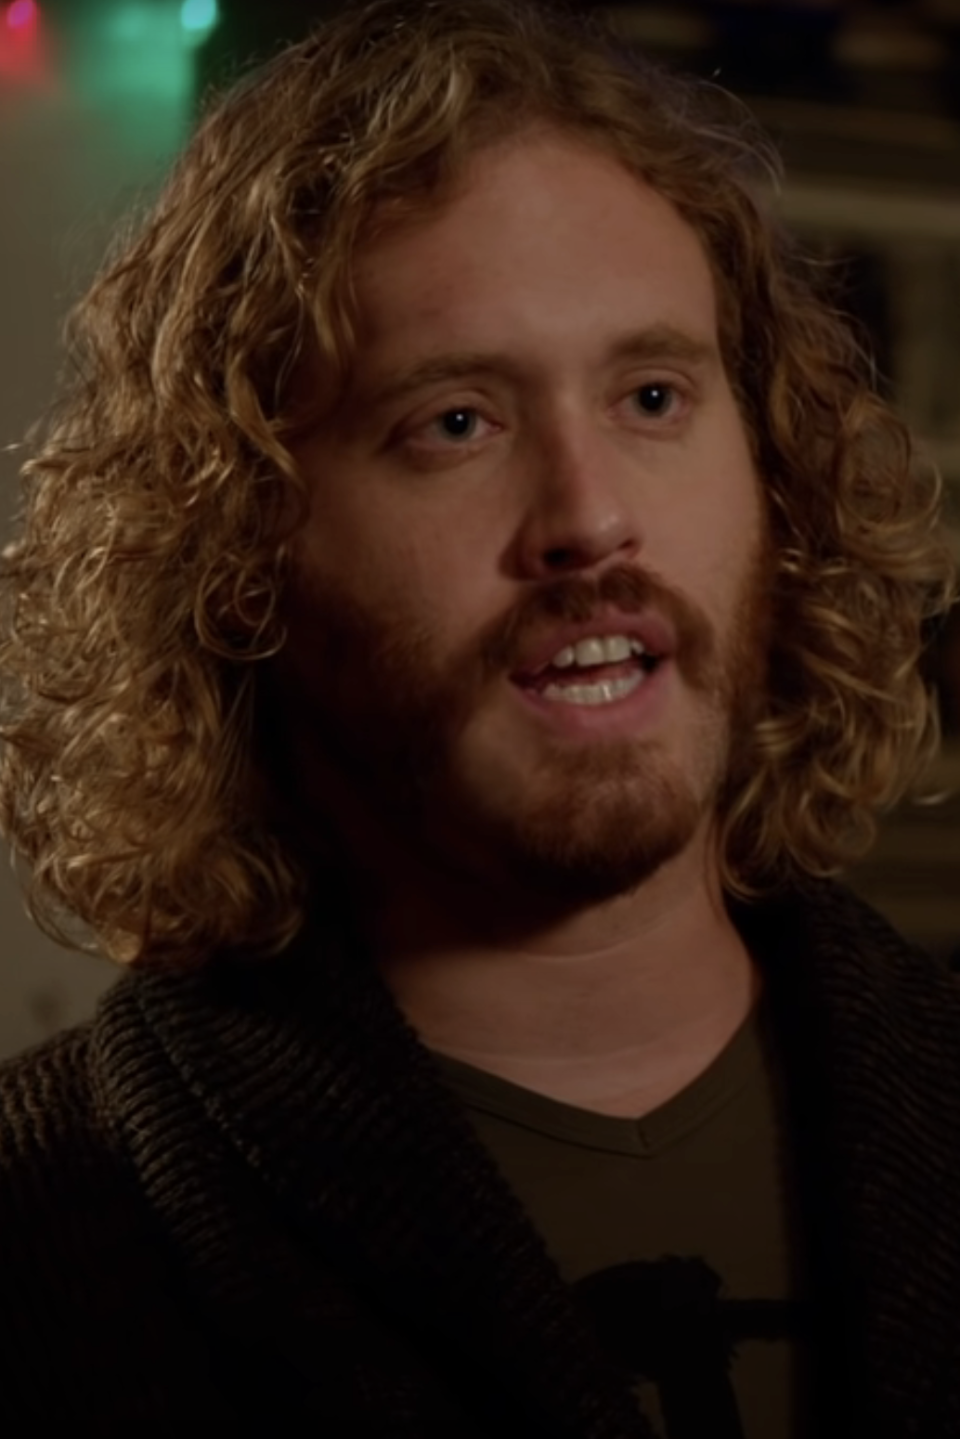 TJ in character as Erlich with curly hair in cardigan